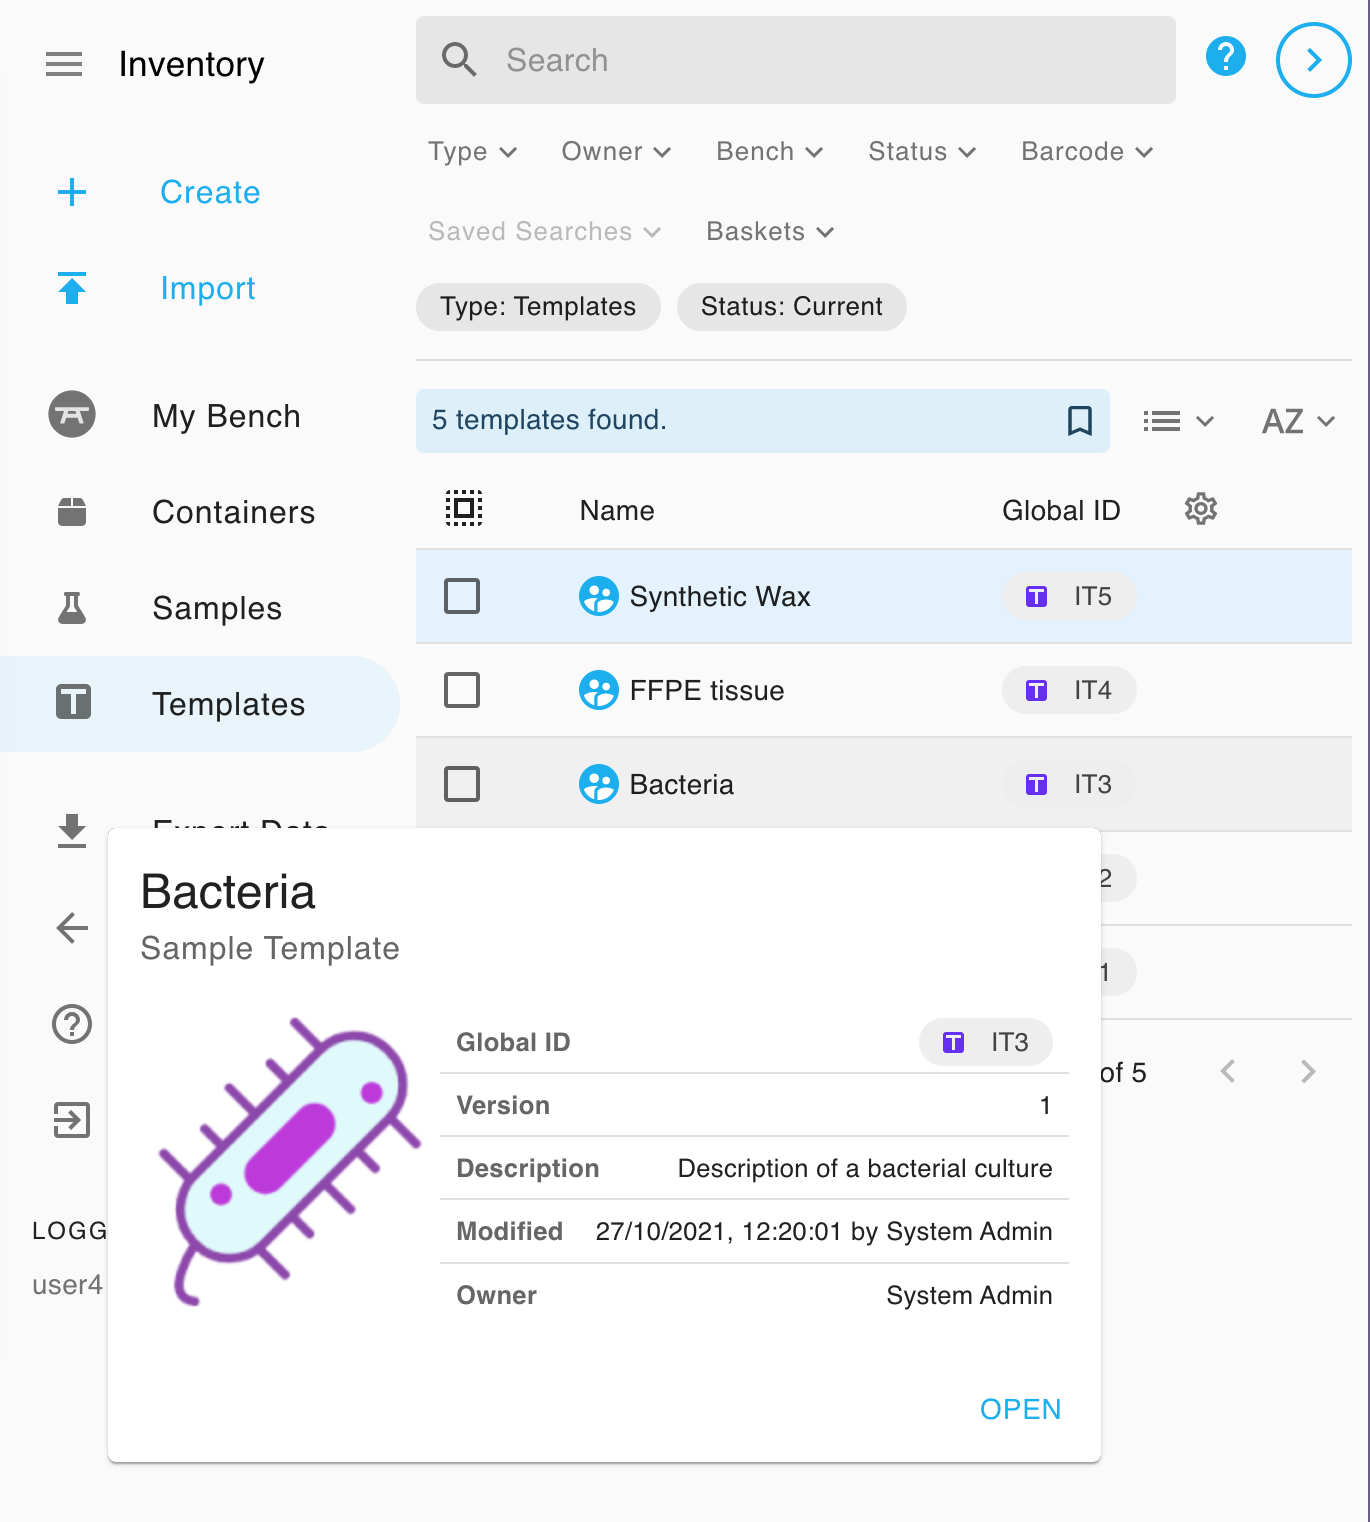 Screenshot of just the sidebar and left panel. The search results are a listing of the default templates. The info popup card displays some of the details of the Bacteria template is open.